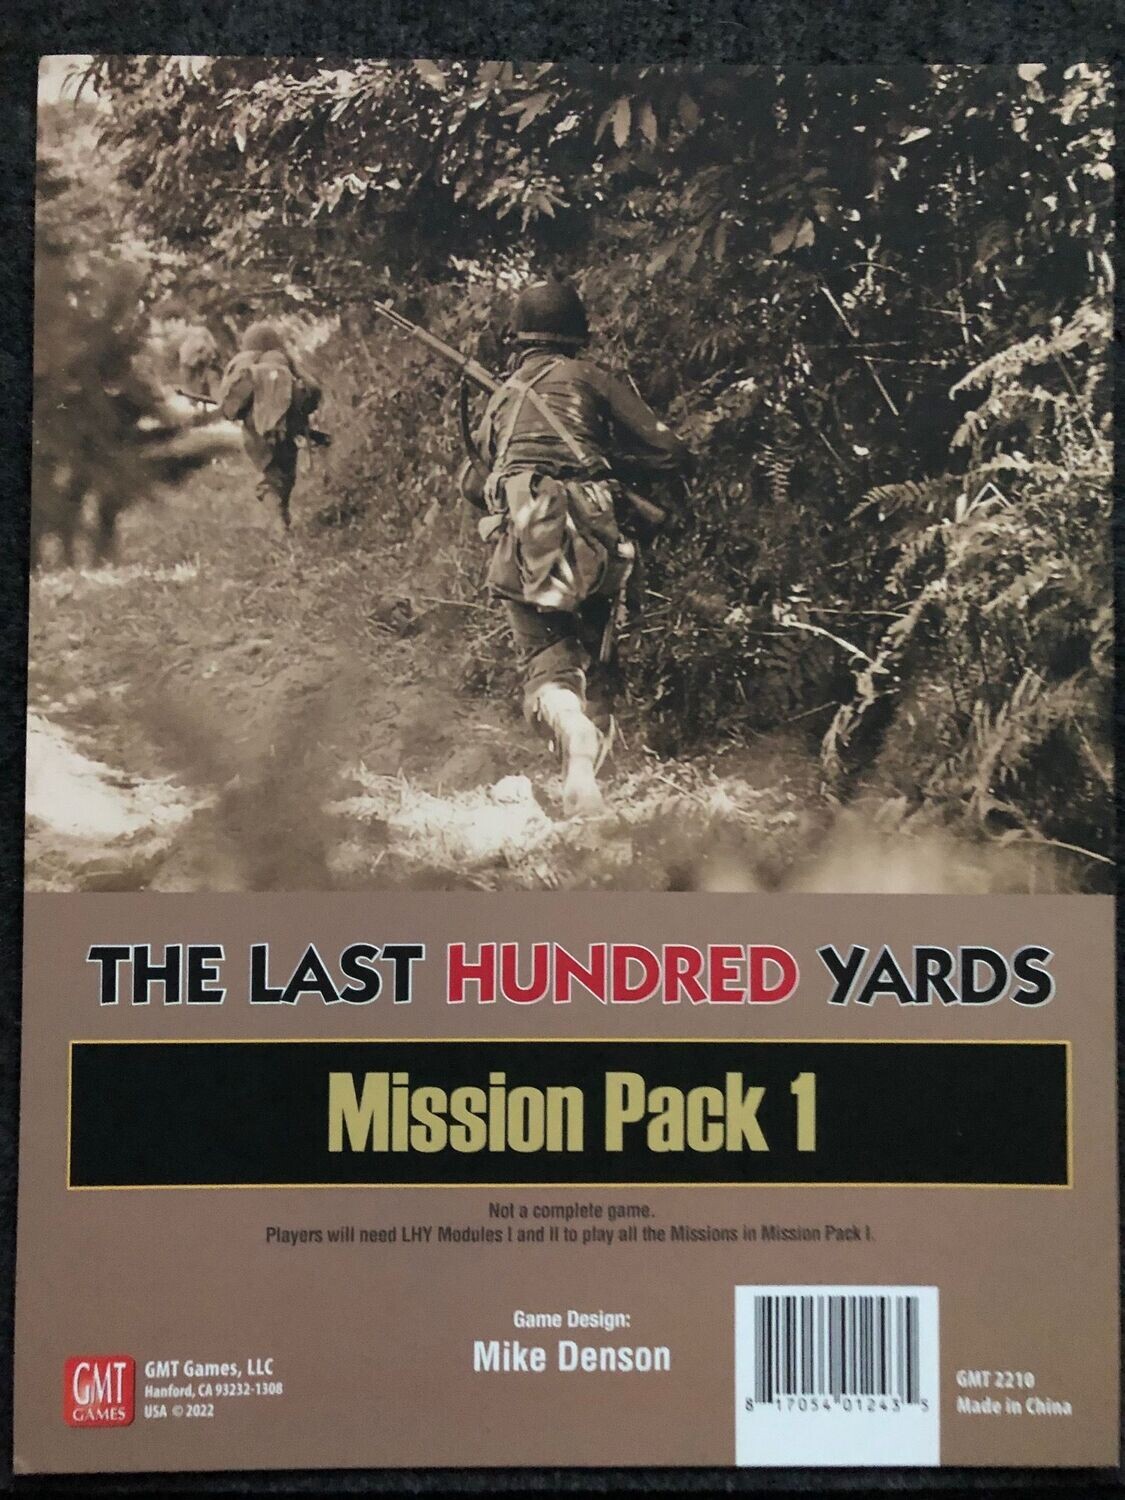 The Last Hundred Yards Mission Pack 1